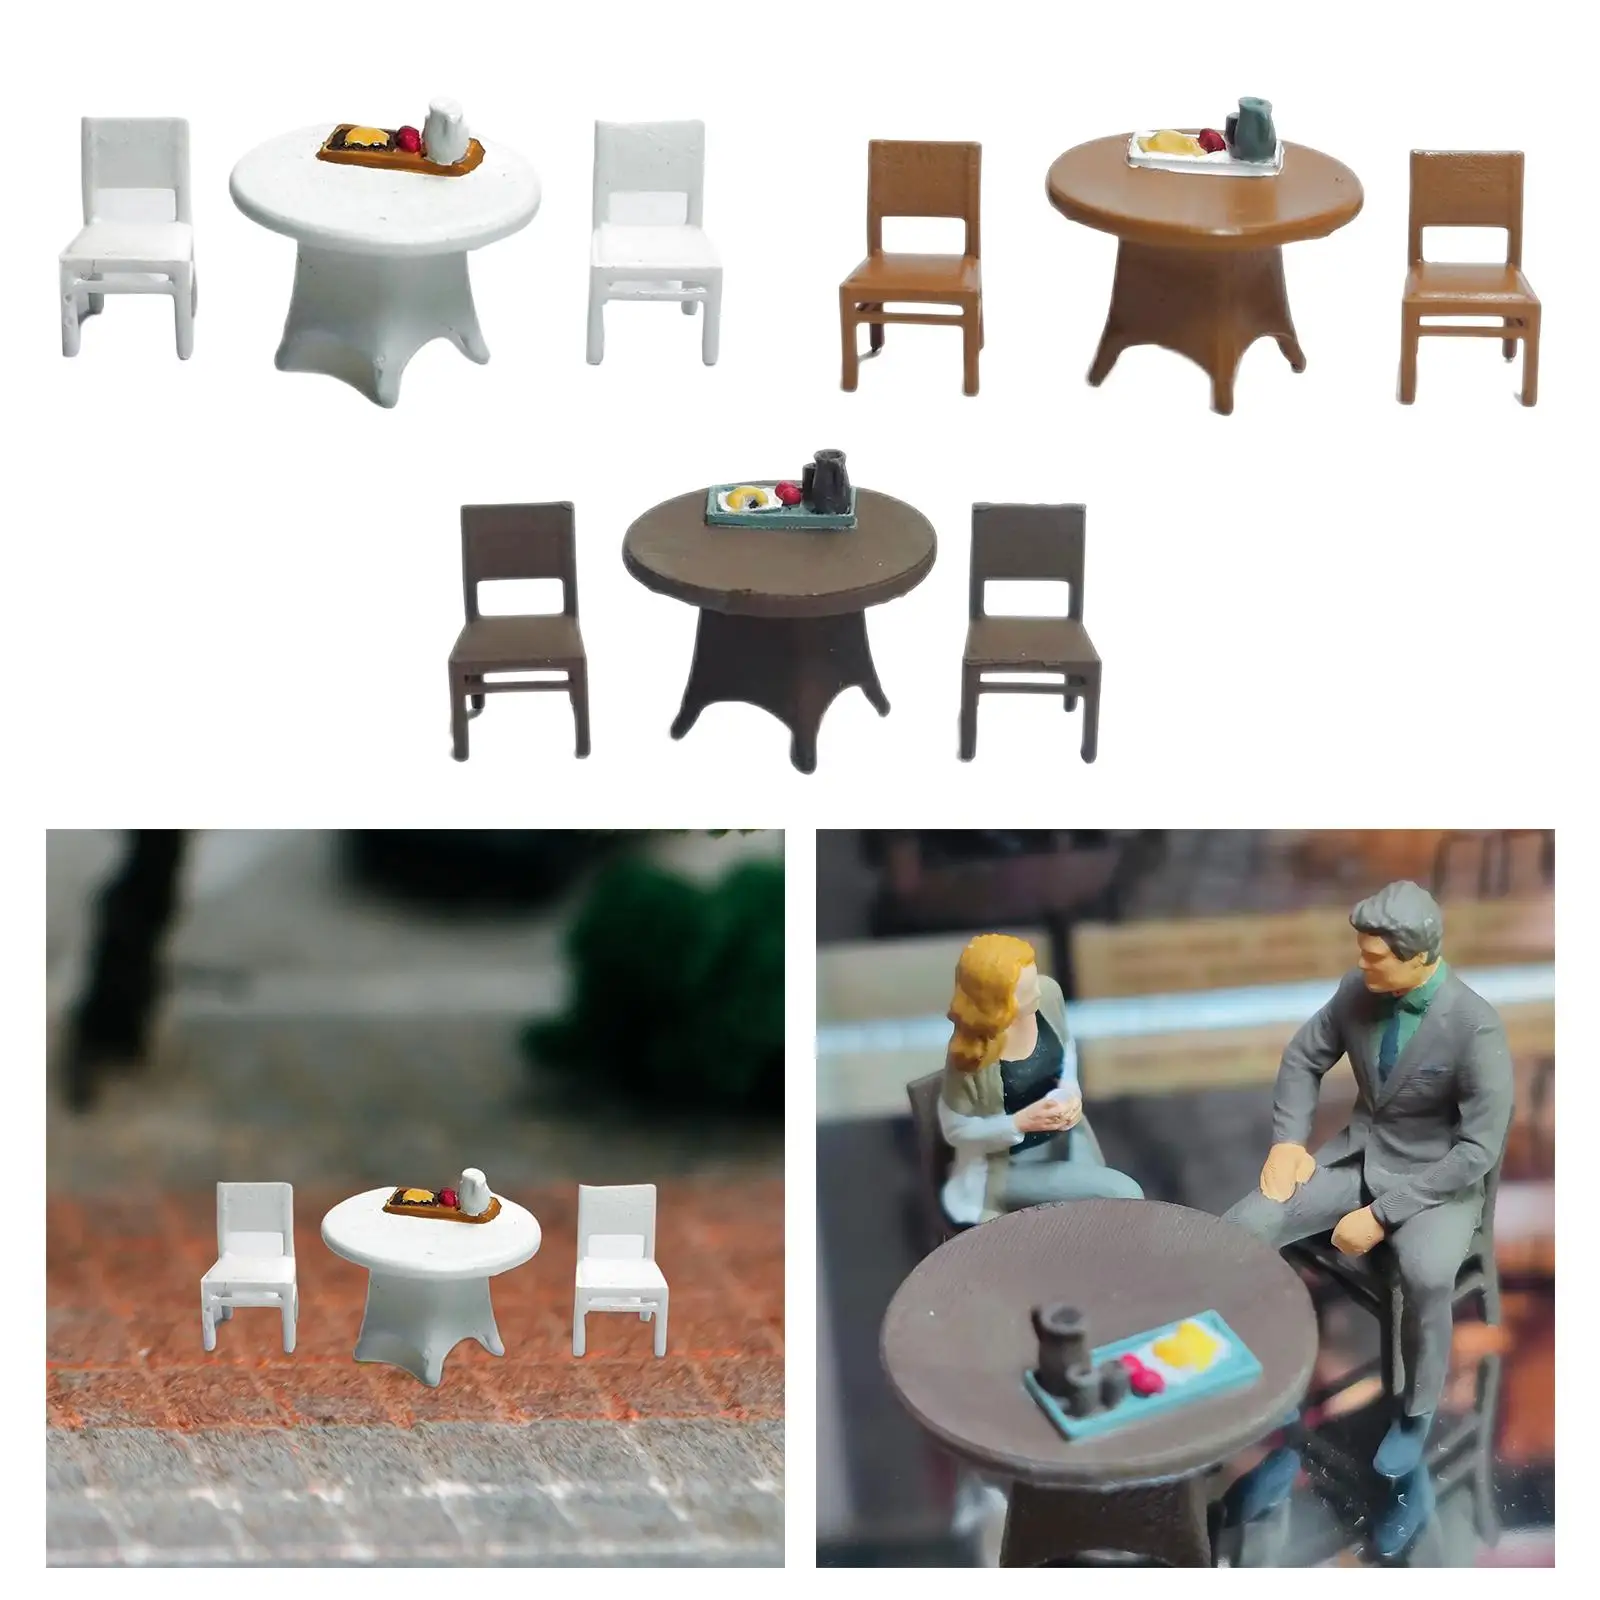 3x 1/64 Table and Chair Model Layout Decoration Trains Architectural Dioramas Collections DIY Projects Miniature Decoration